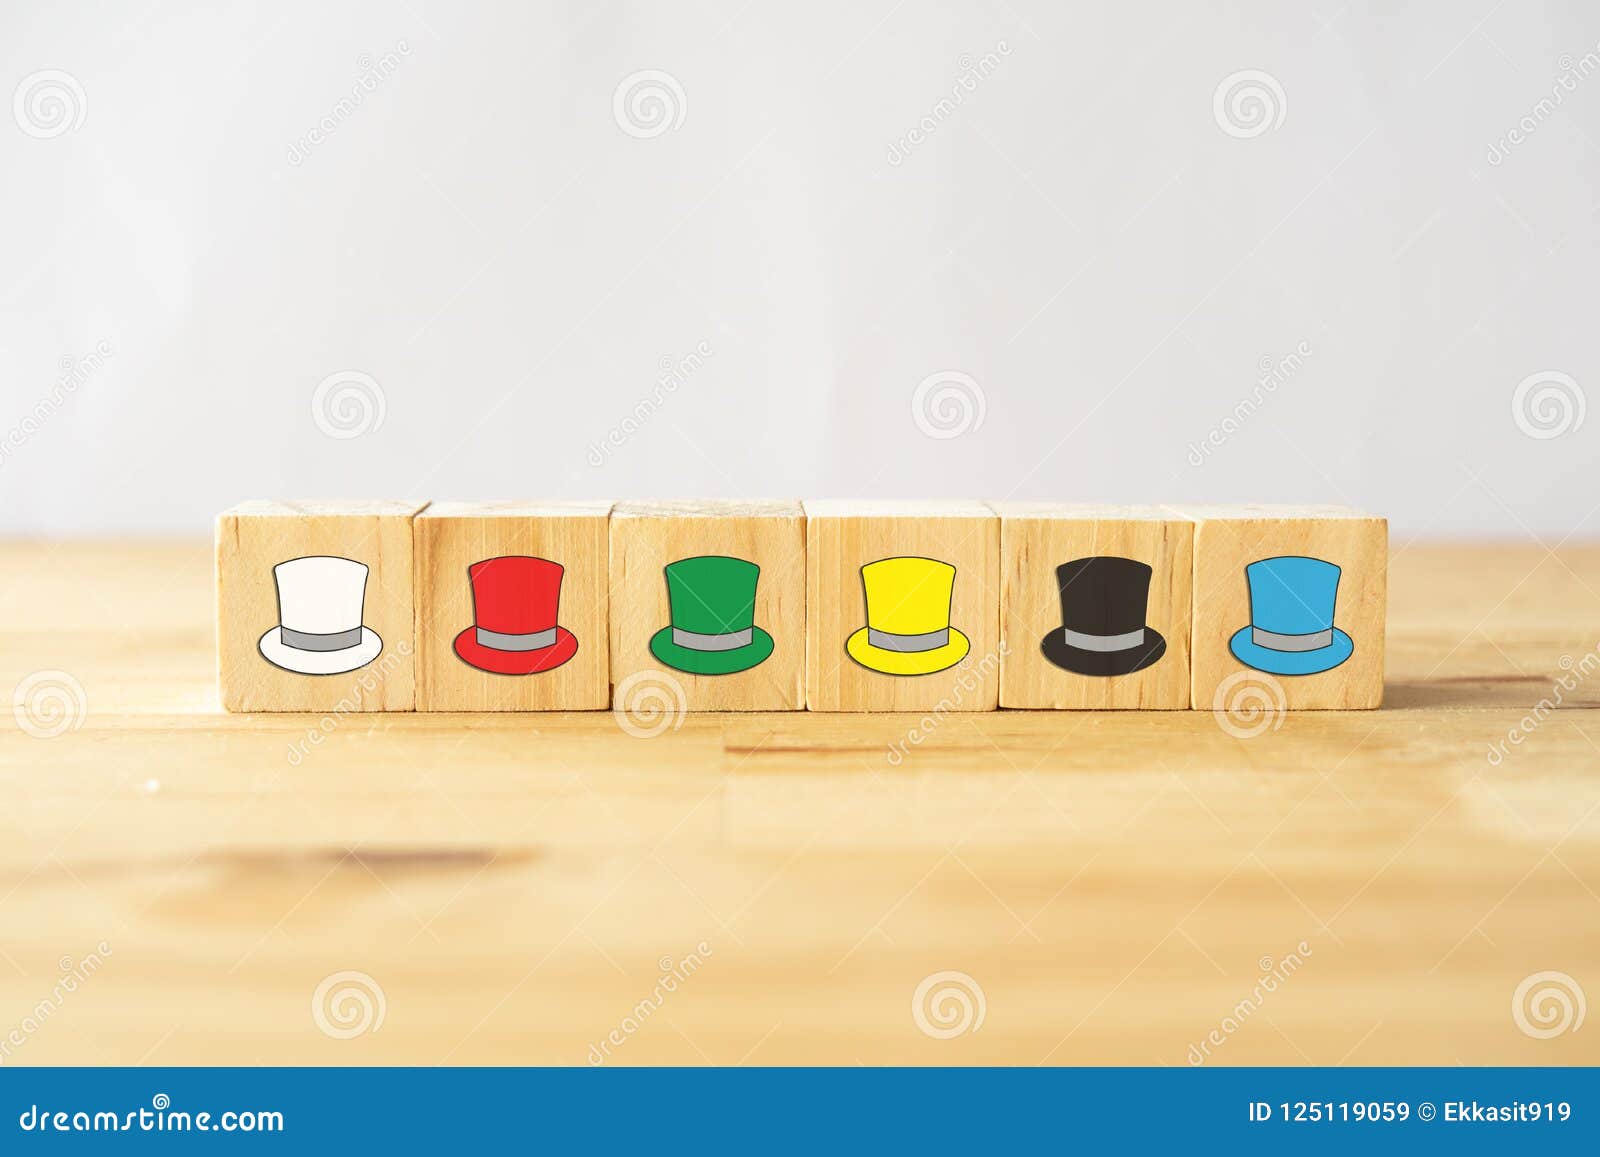 six thinking hats concept, the success way to under the human wear which hat when talking about, the hats including feeling/emotio